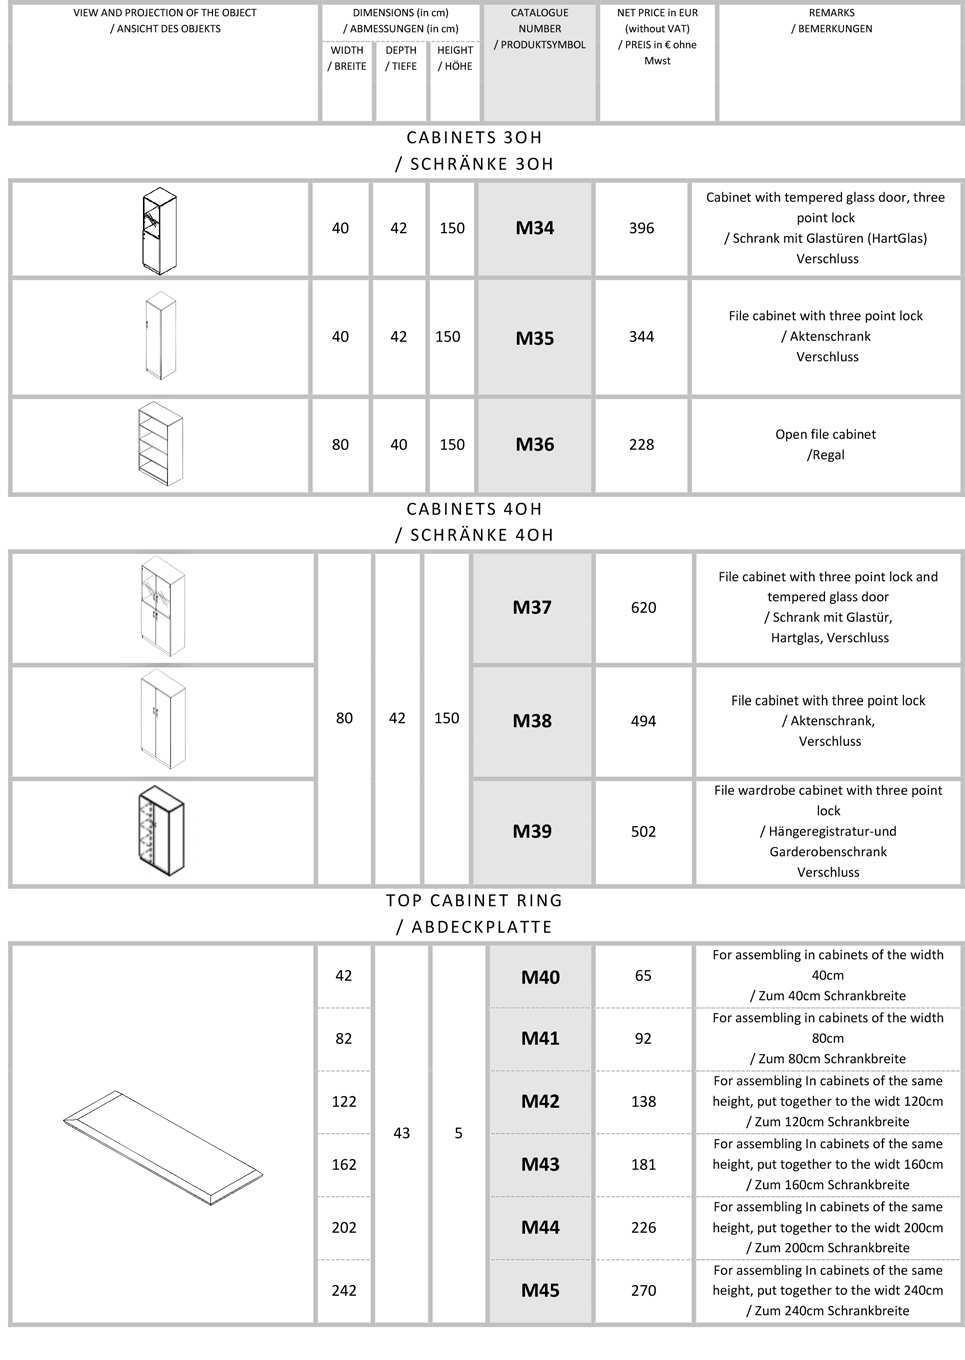 PRICES / PREISE PRICES / PREISE VIEW AND PROJECTION OF THE OBJECT / ANSICHT DES OBJEKTS DIMENSIONS (in cm) / ABMESSUNGEN (in cm) WIDTH /BREITE DEPTH / TIEFE HEIGHT / HÖHE CATALOGUE NUMBER /